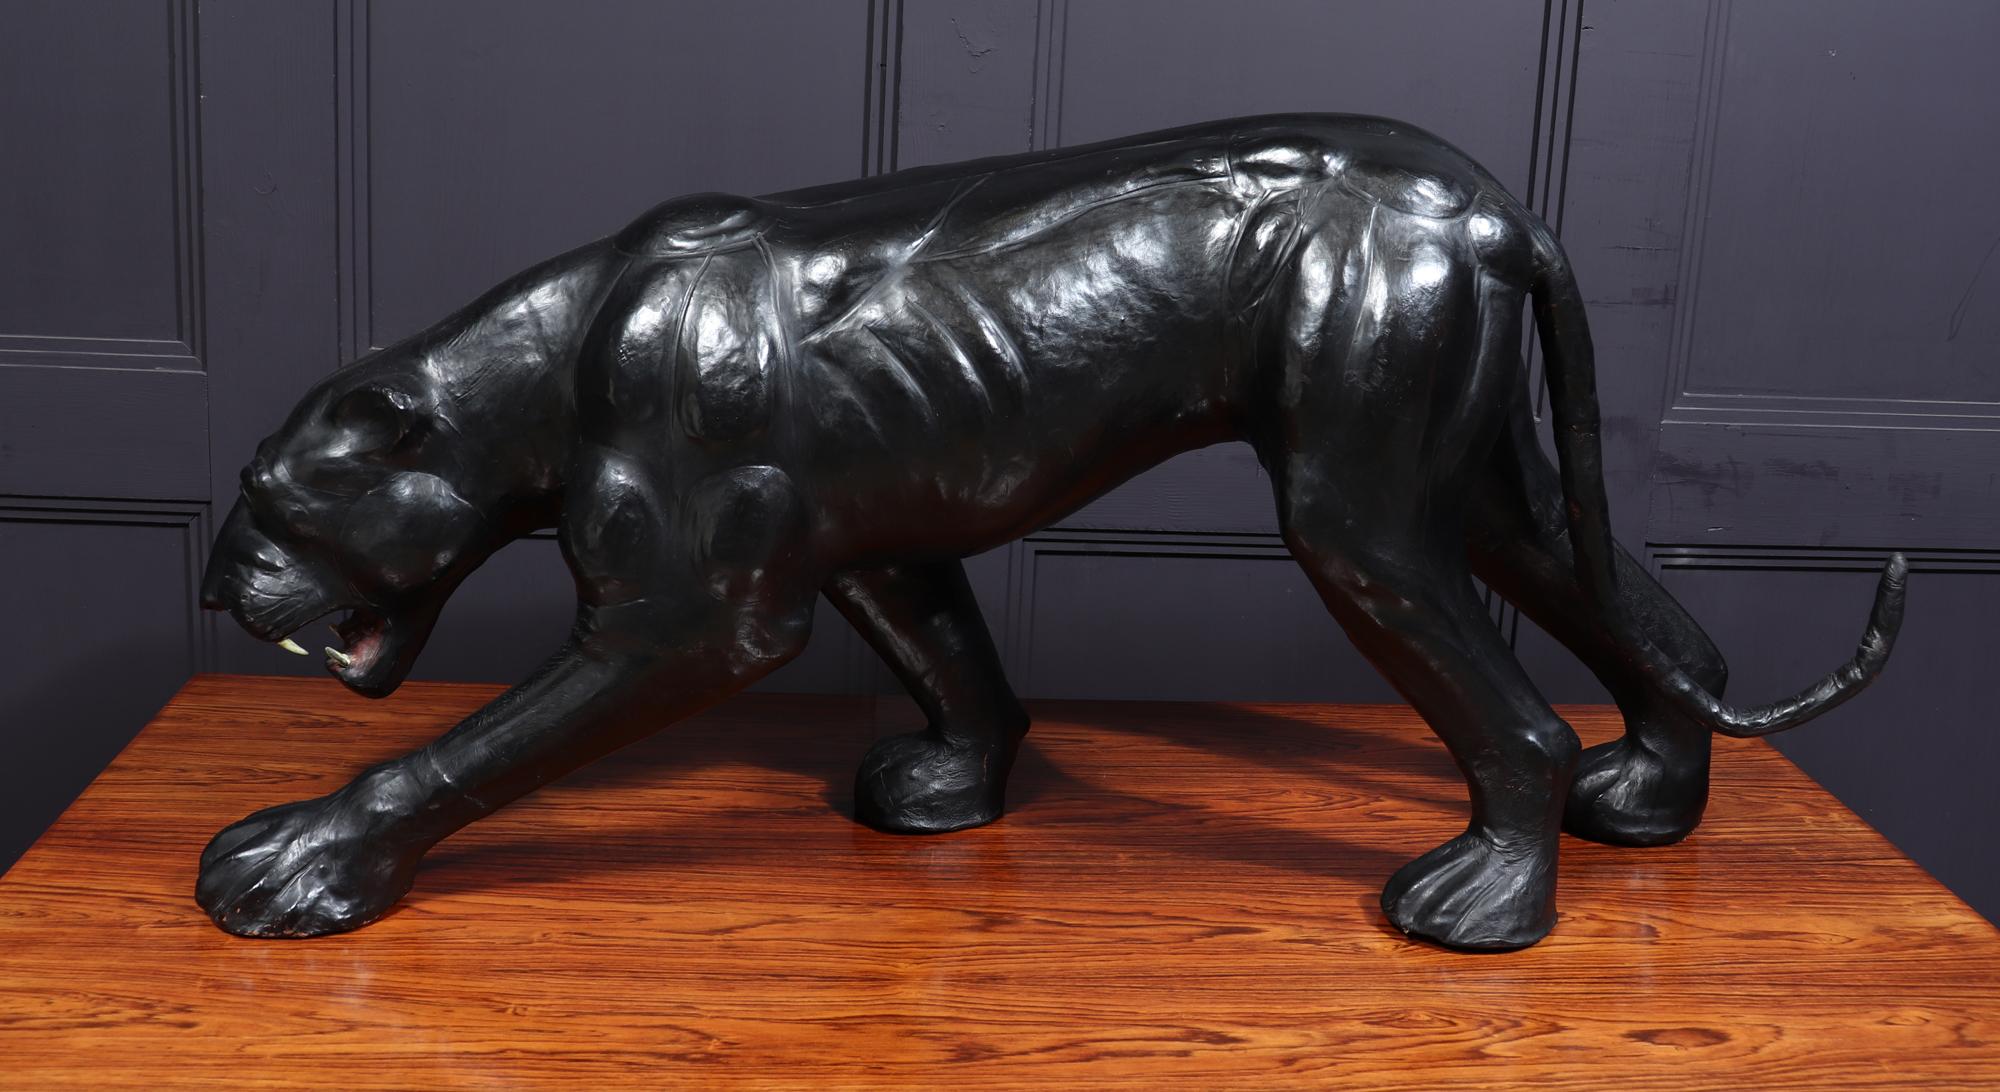 Large Leather Clad Panther Sculpture 1